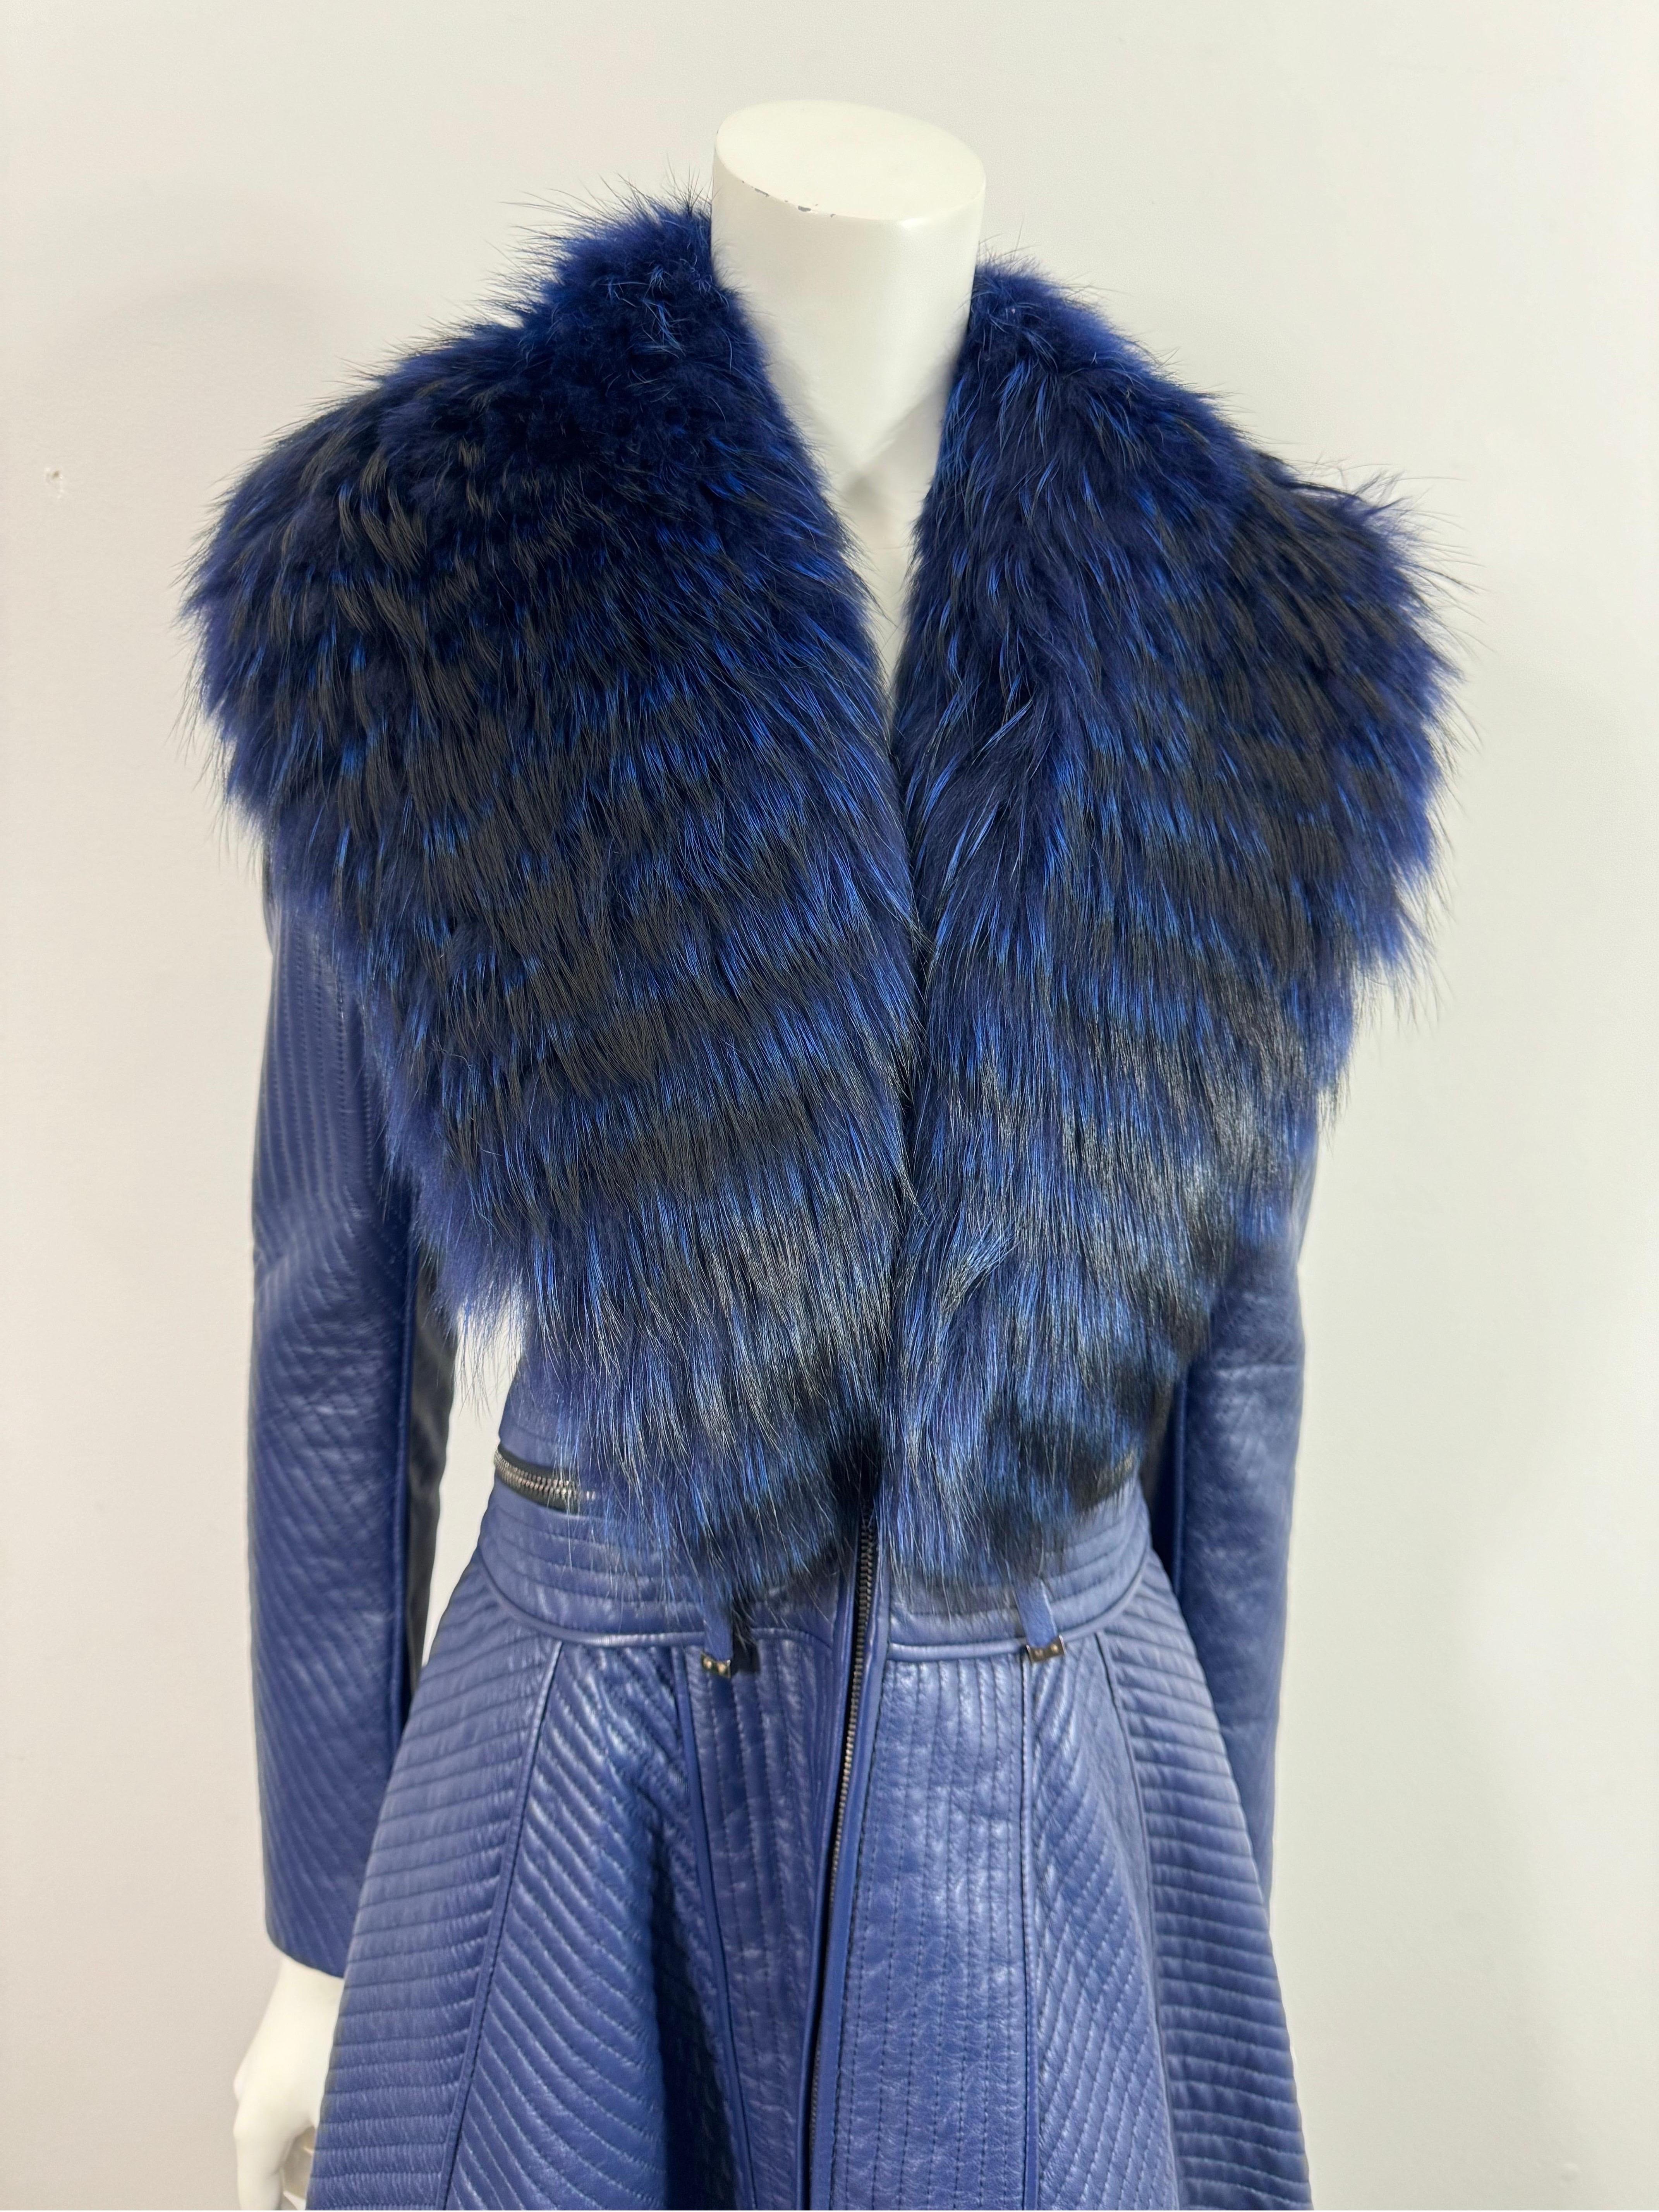 J Mendel Runway Pre Fall 2014 Blue Striped Dyed Raccoon Fur Collar Blue Quilted Leather Coat Dress-Size 4  This fabulous coat can be worn as a dress and was runway look #9 in the J Mendel Pre Fall 2014 Fashion Show. The coat is made of a quilted